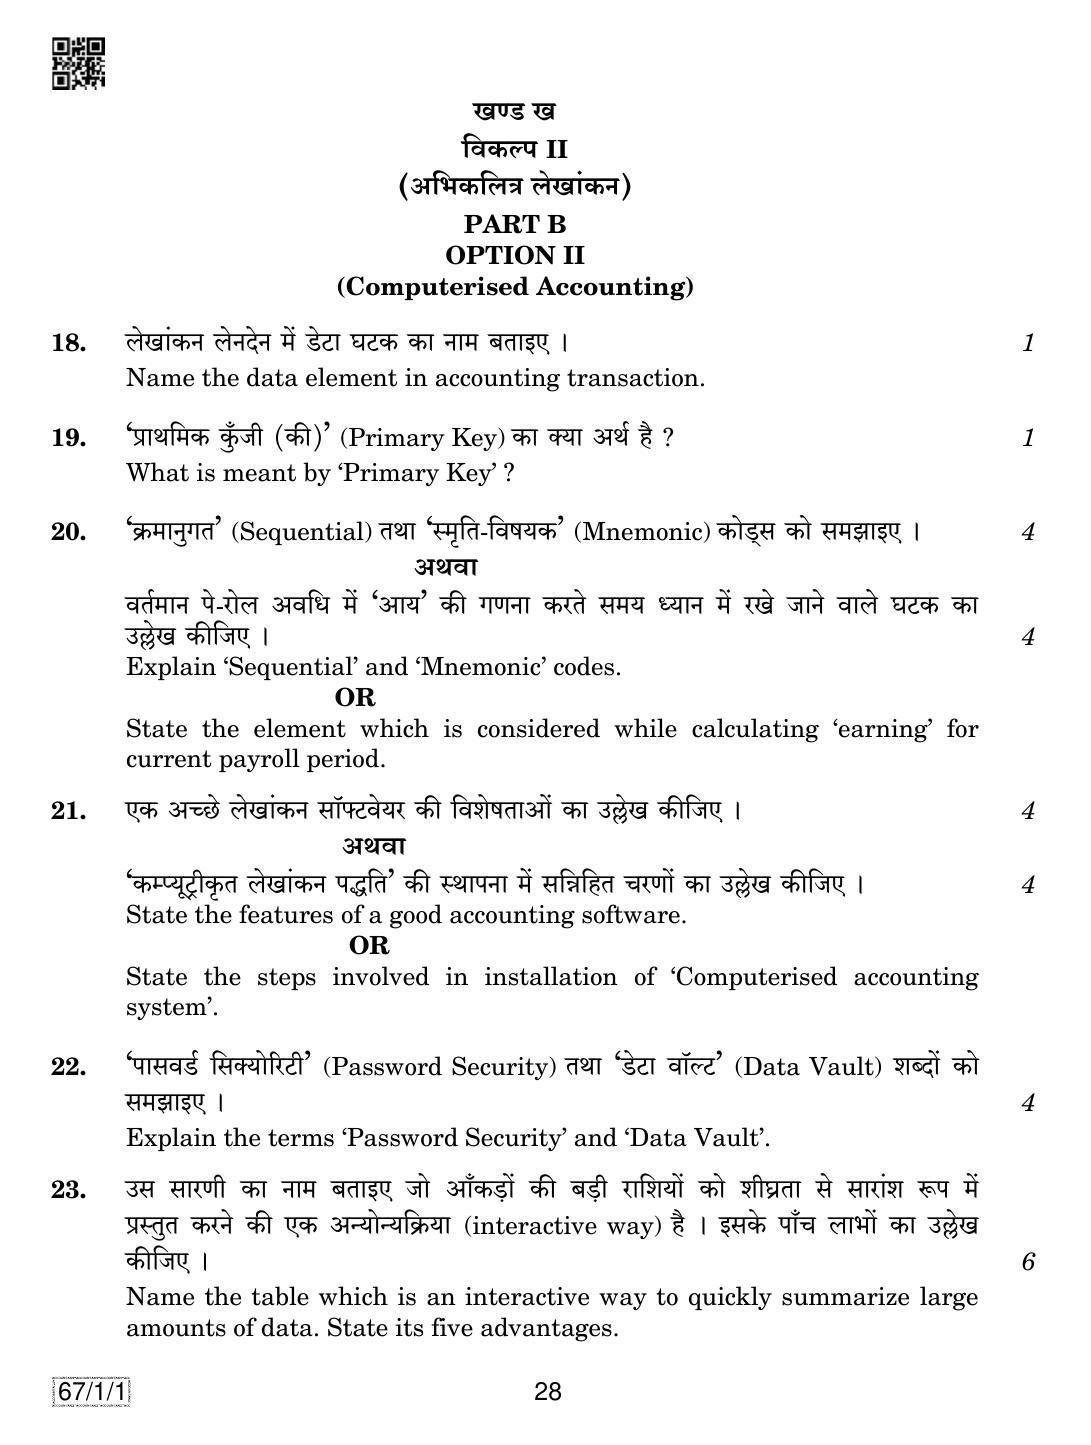 CBSE Class 12 67-1-1 ACCOUNTANCY 2019 Compartment Question Paper - Page 28